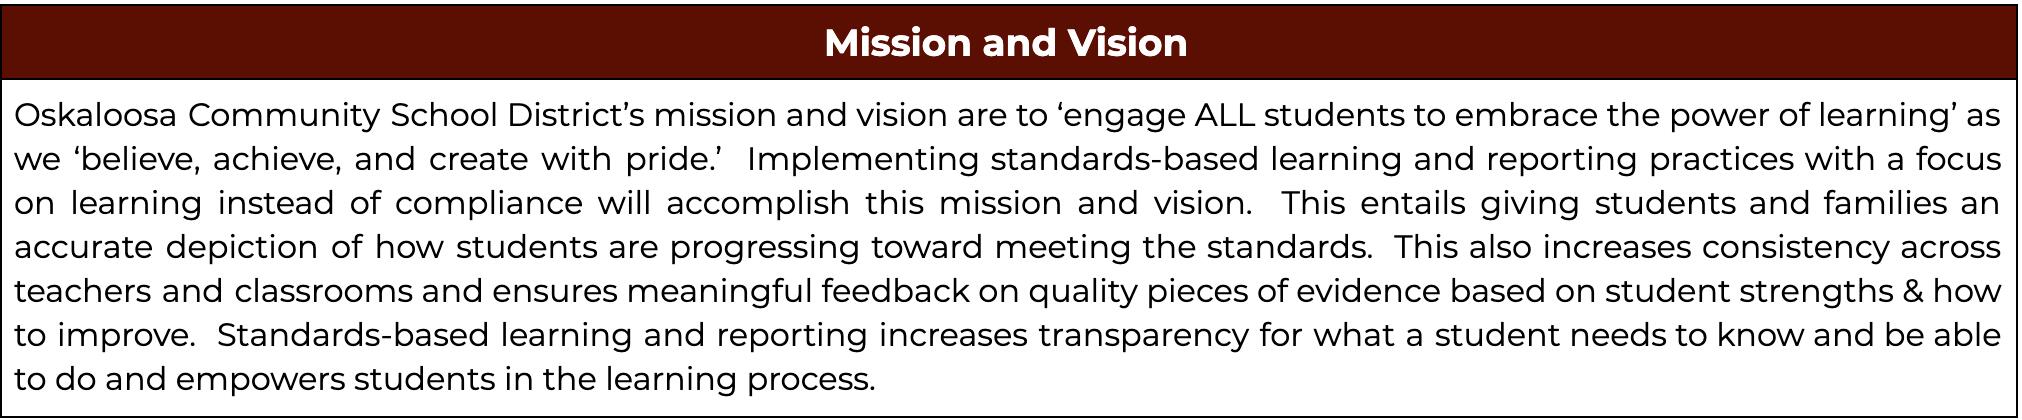 District Mission and Vision Connects to Standards-Based Learning and Reporting